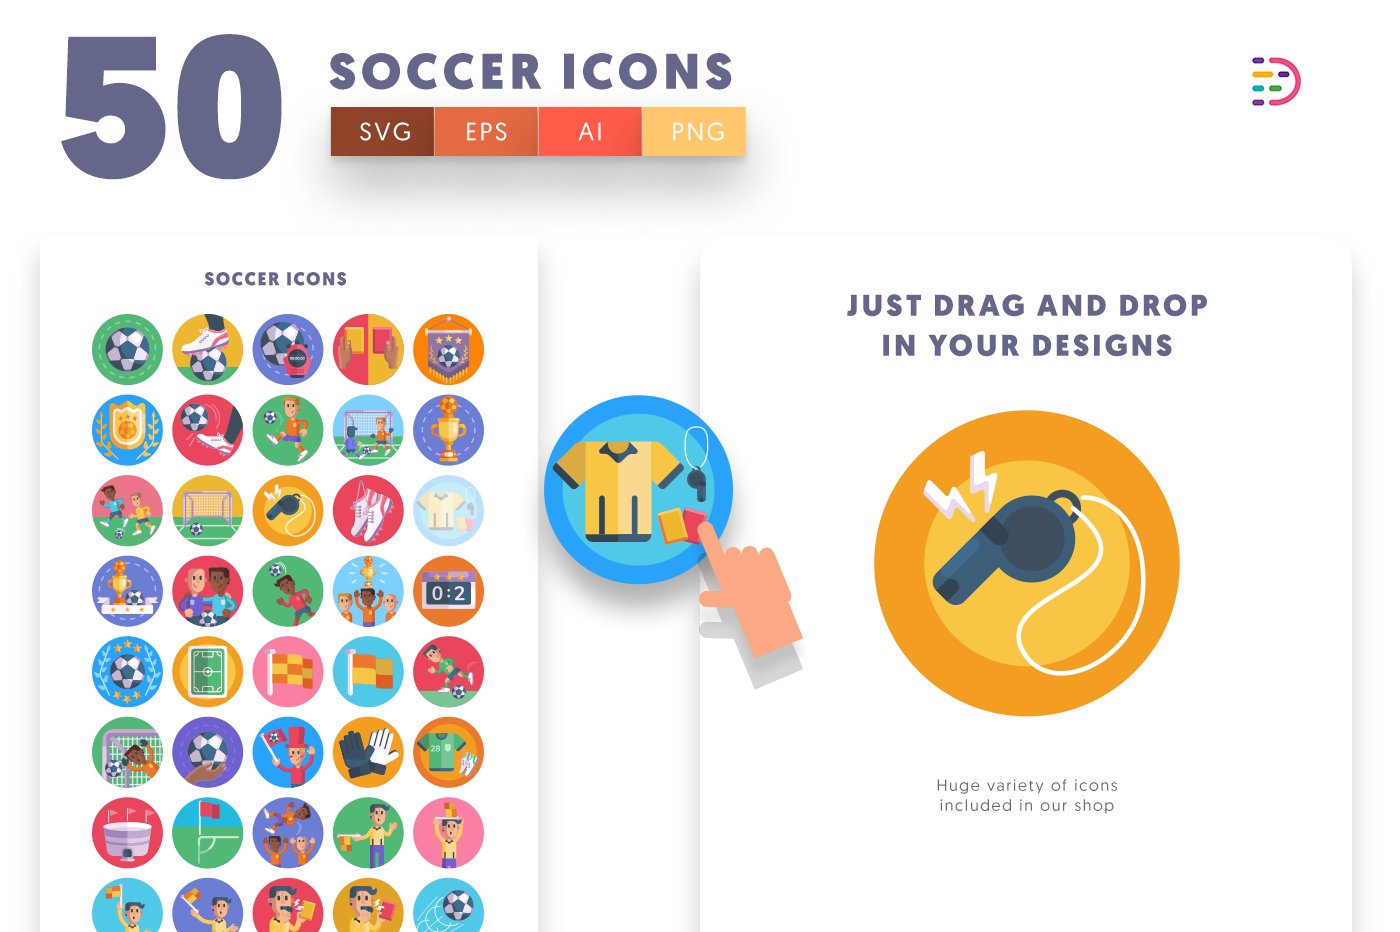 soccer icons cover 1 620